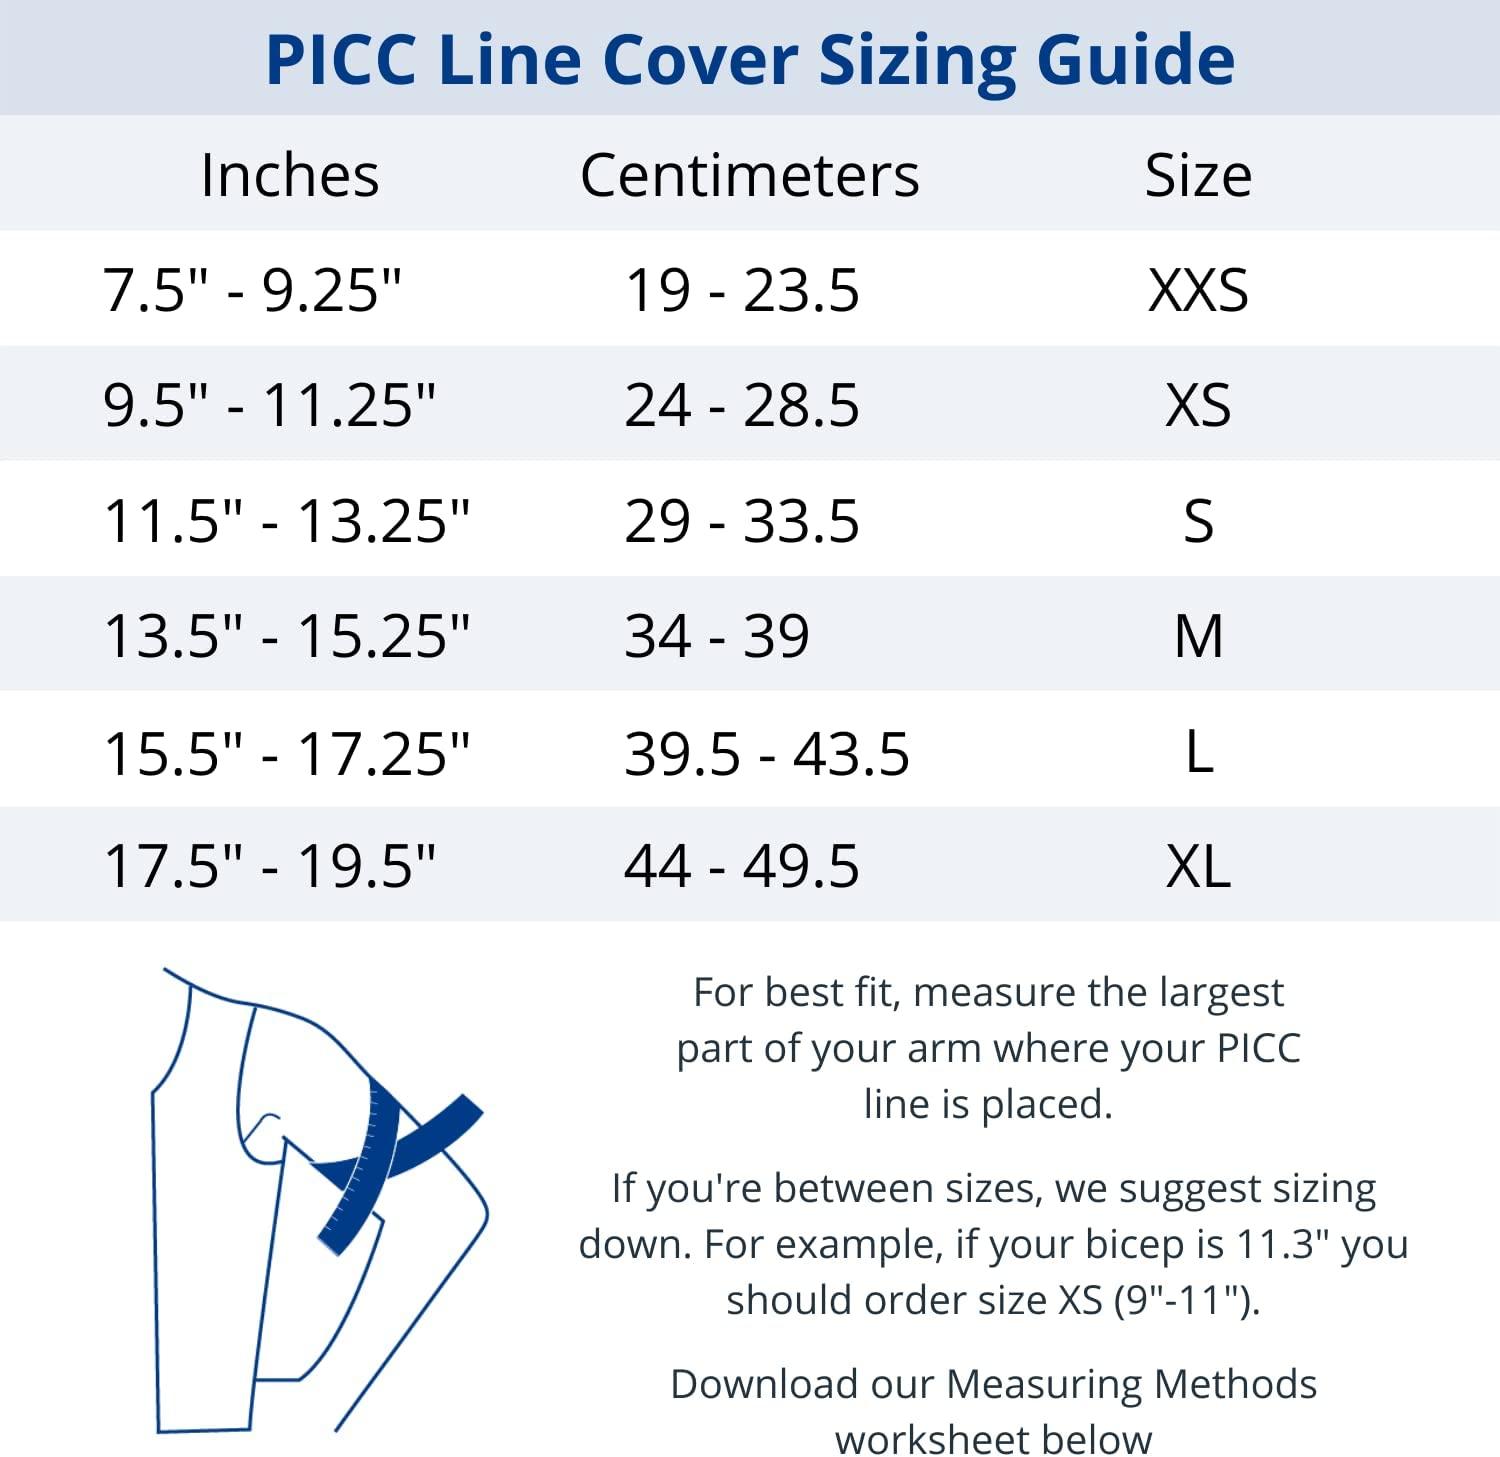 picc line covers